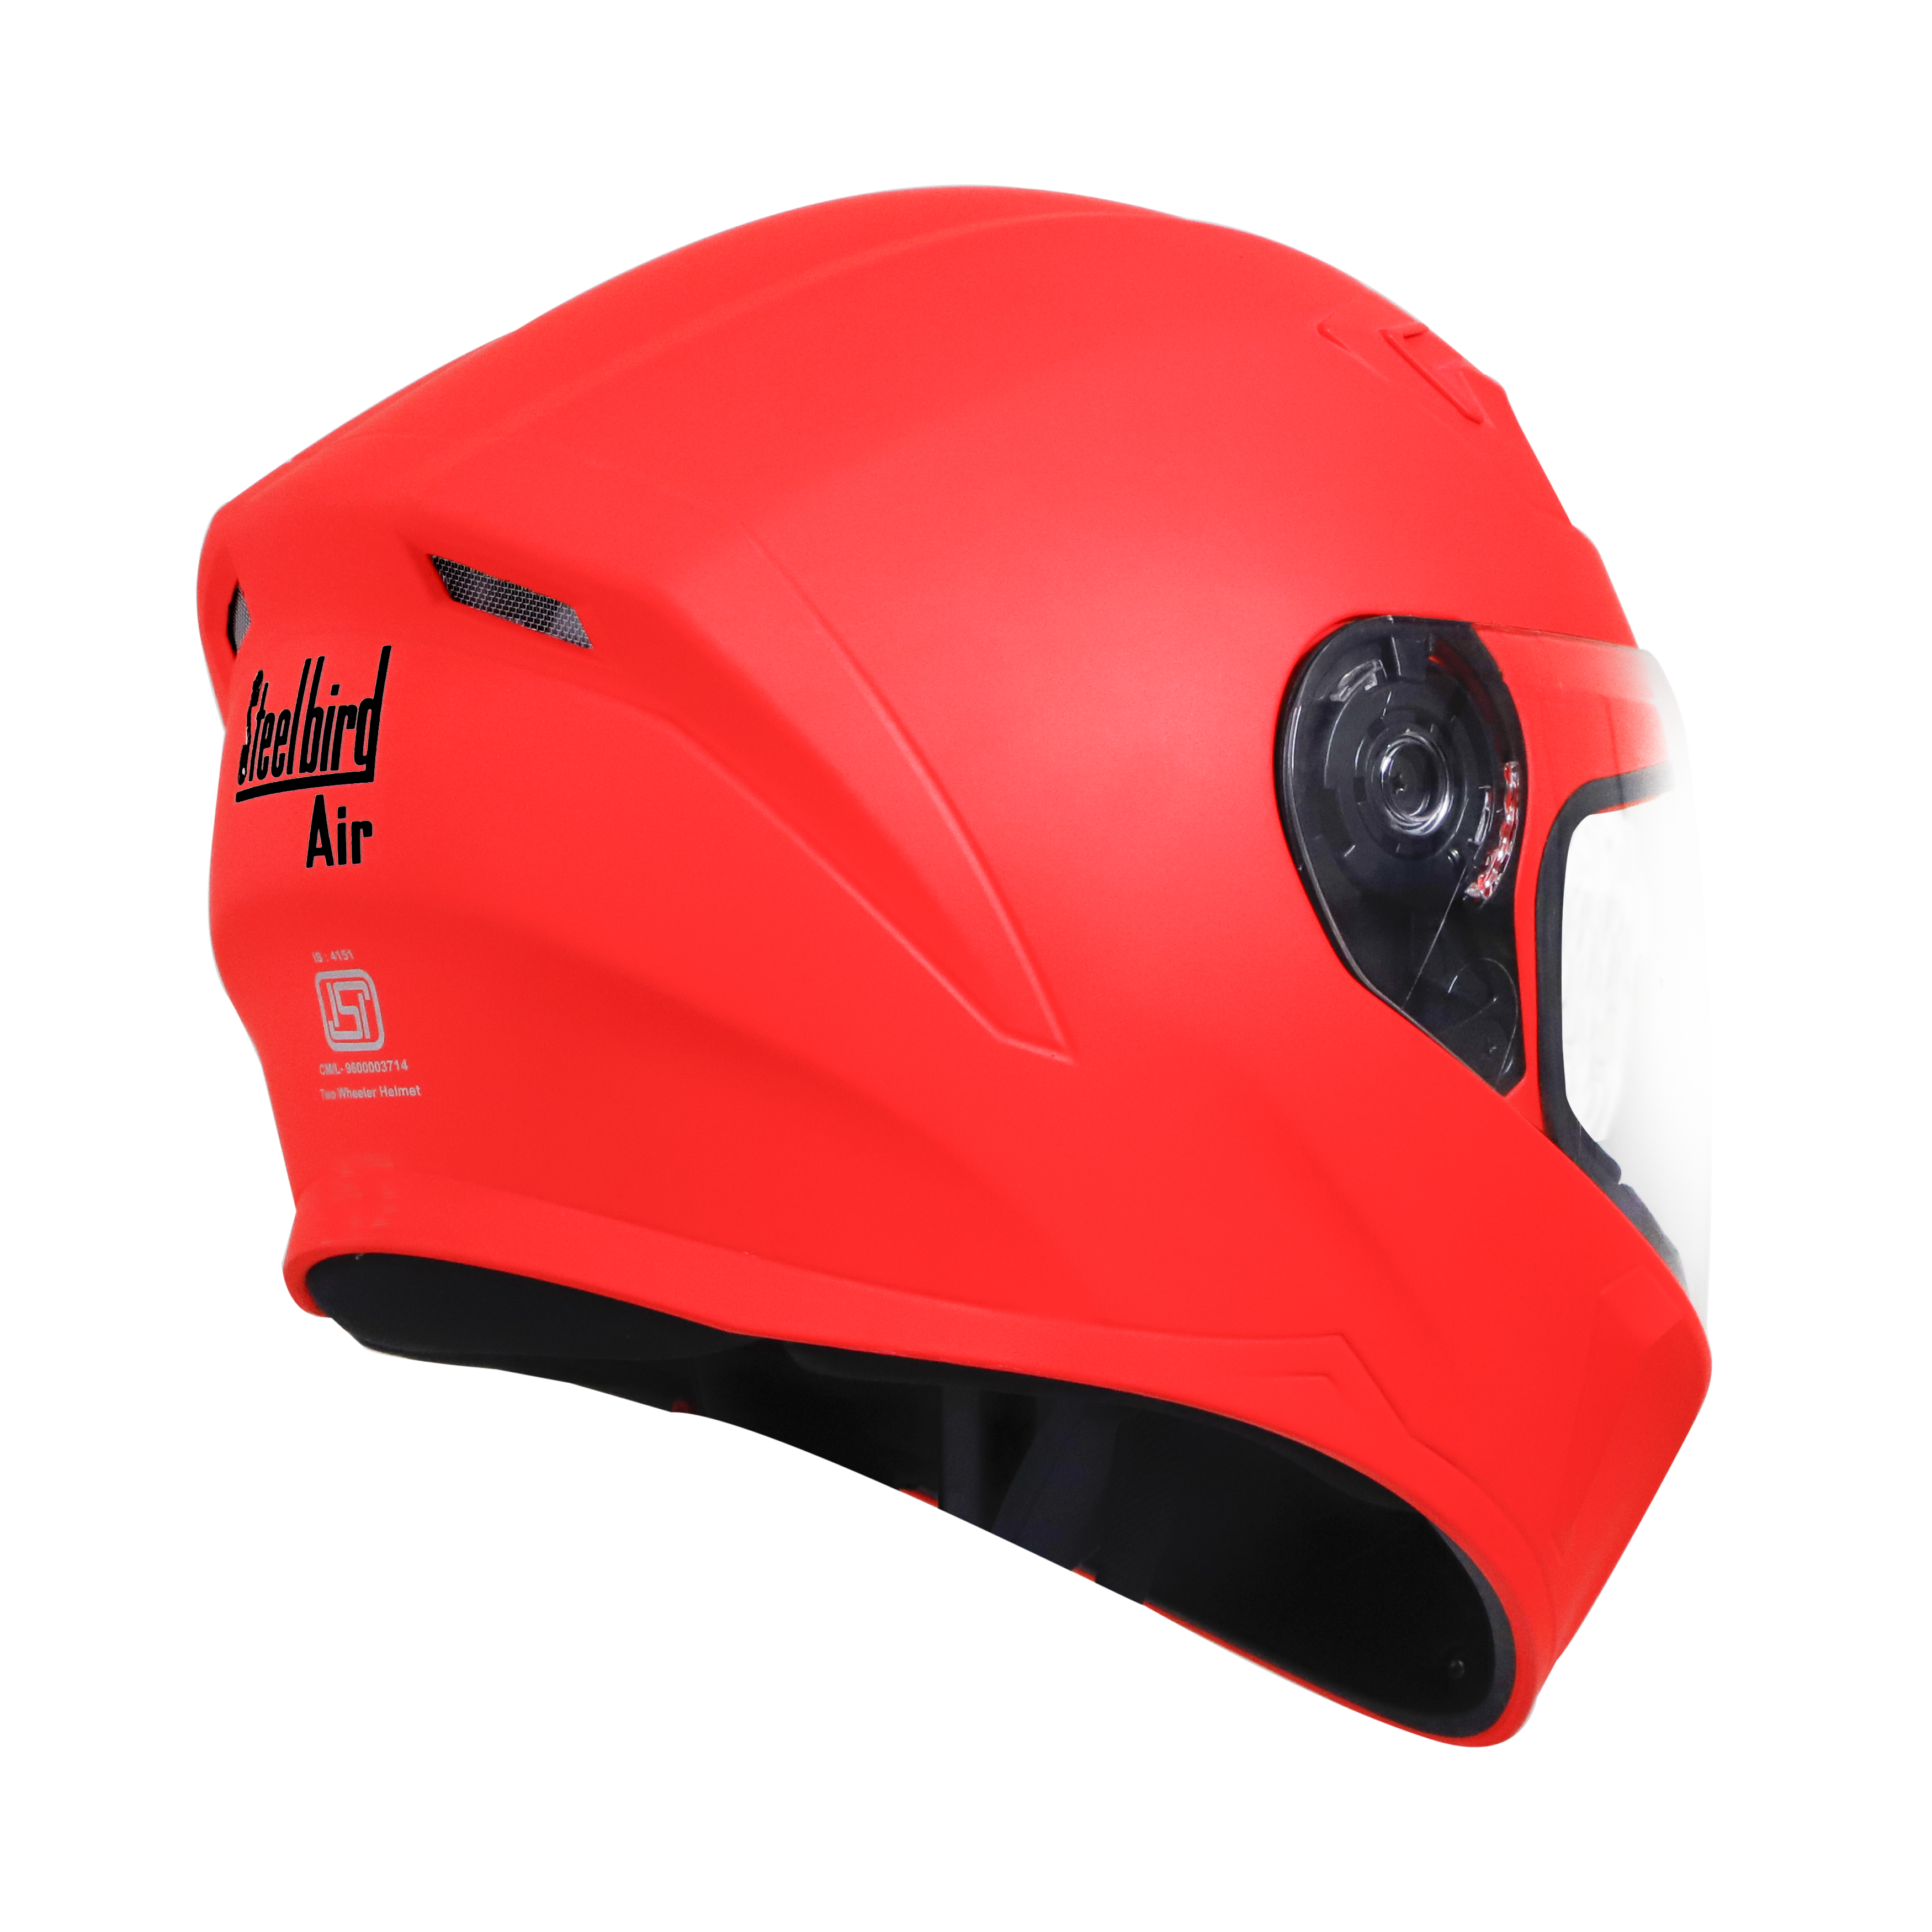 Steelbird SBA-21 GT Full Face ISI Certified Helmet (Glossy Fluo Watermelon With Clear Visor)